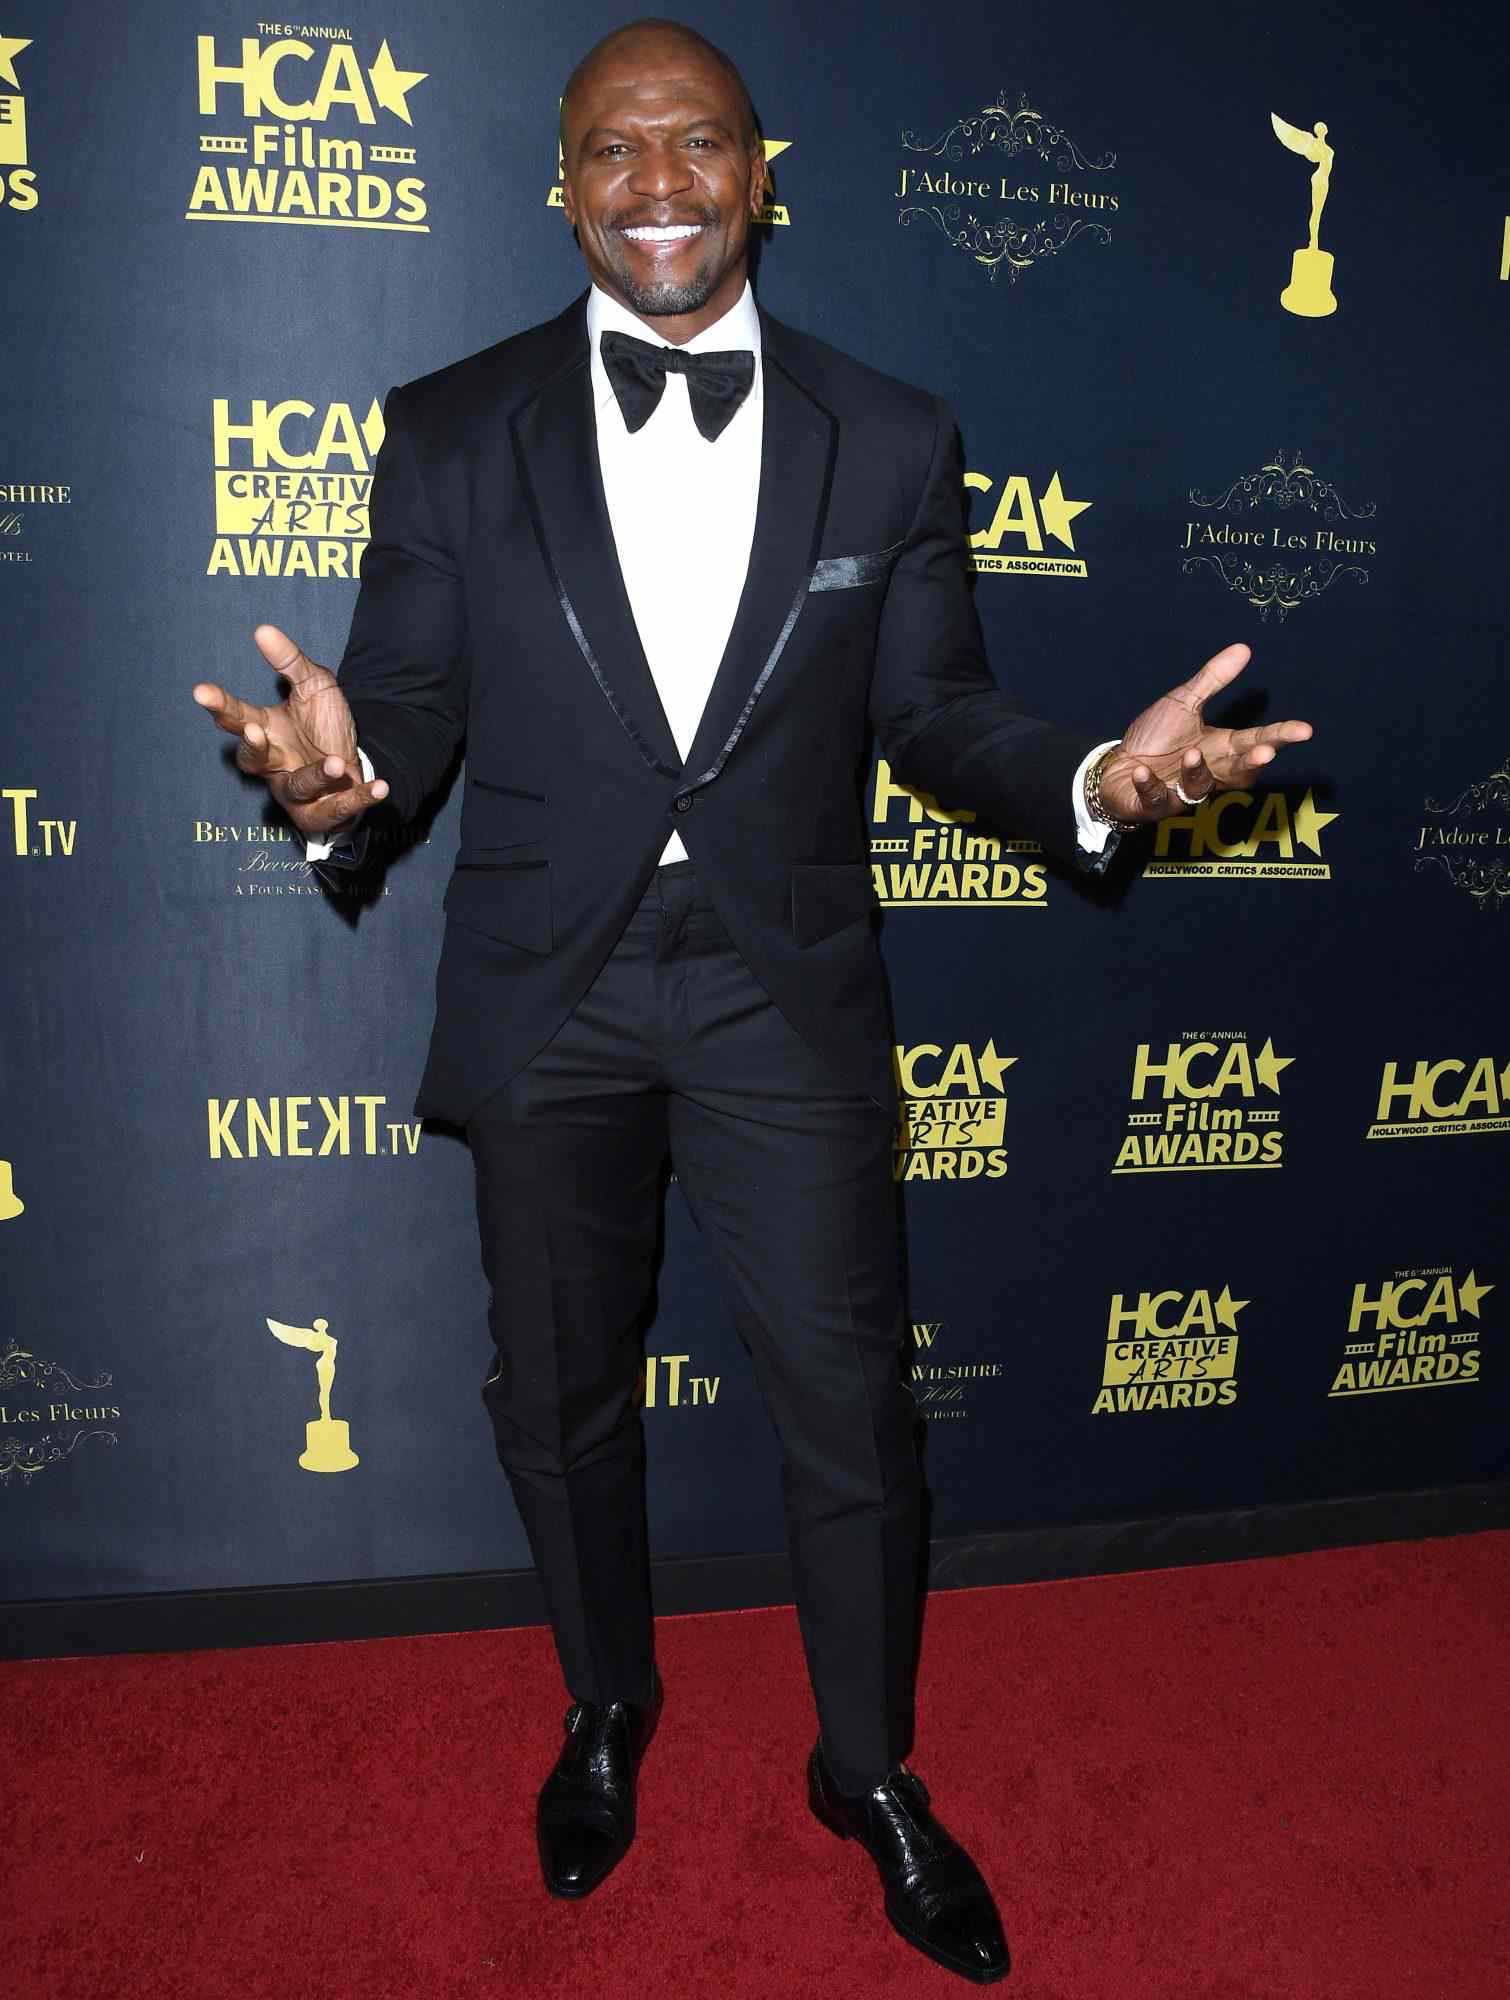 BEVERLY HILLS, CALIFORNIA - FEBRUARY 24: Terry Crews arrives at the Hollywood Critics Association's 2023 HCA Film Awards at Beverly Wilshire, A Four Seasons Hotel on February 24, 2023 in Beverly Hills, California. (Photo by Steve Granitz/FilmMagic)